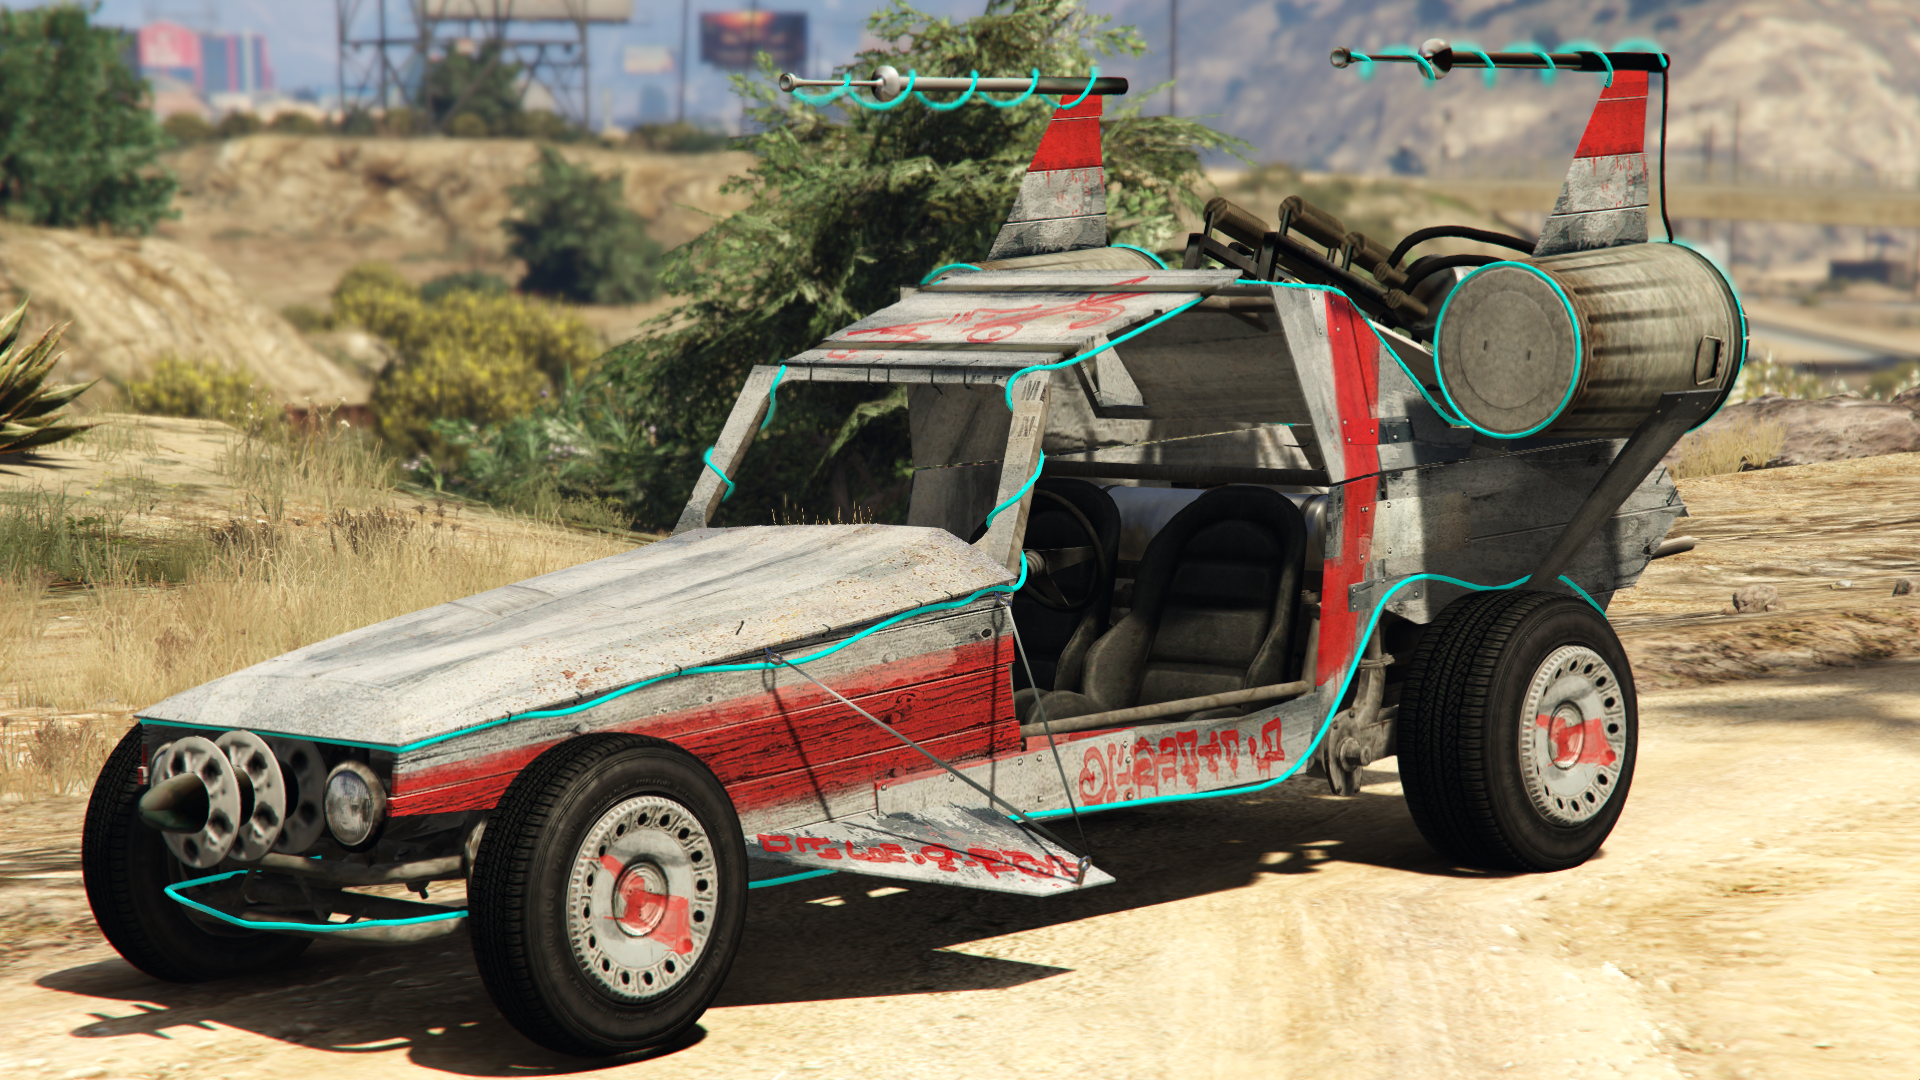 GTA V Sandbox Mode Has Unique Vehicles and Everything Unlocked for Free -  autoevolution